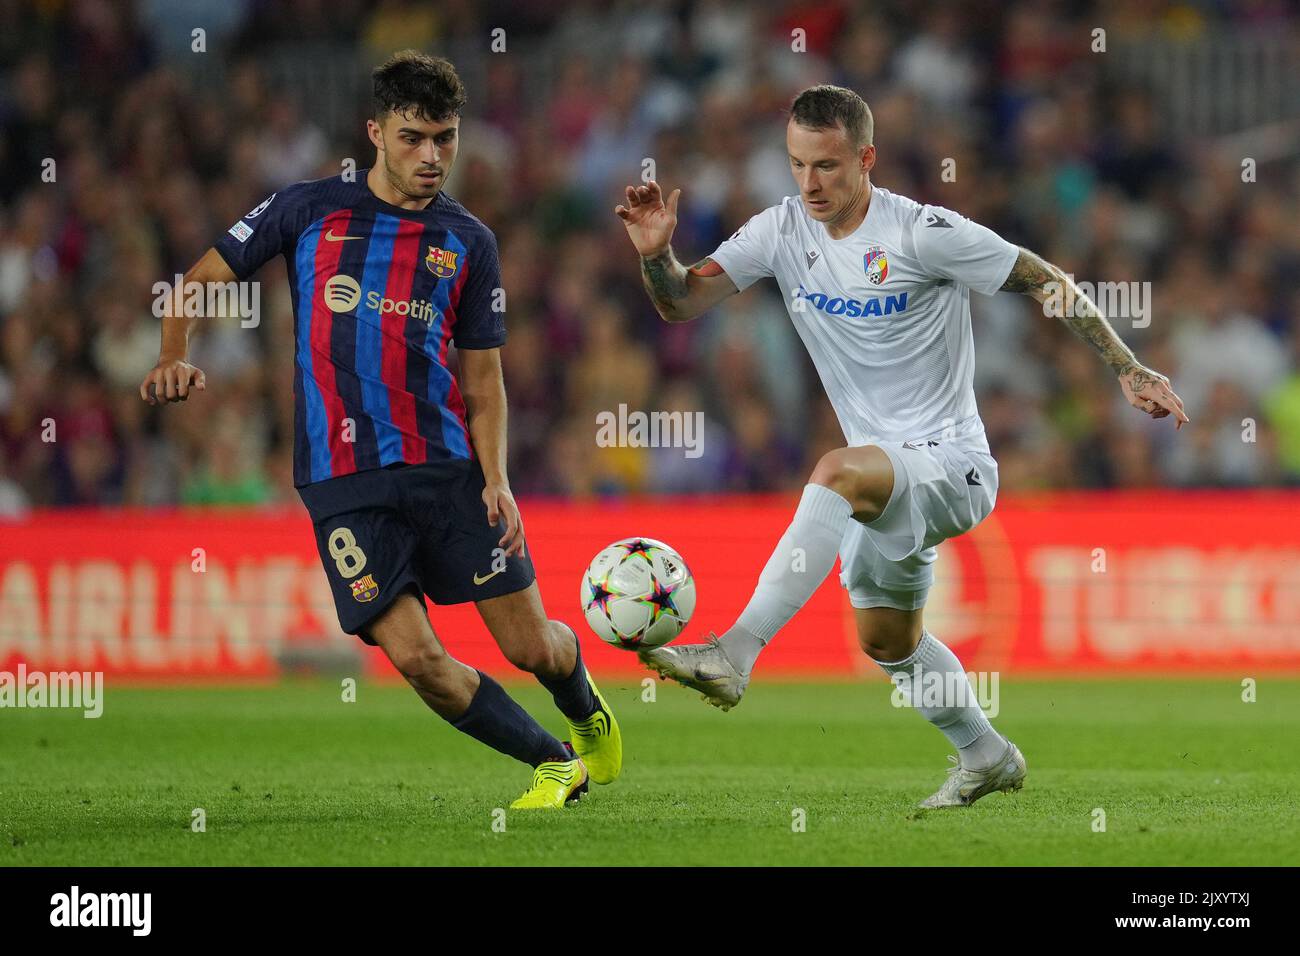 Barcelona, Spain. 07th Sep, 2022. Pedro Gonzalez Pedri of FC Barcelona and Jan Sykora of Viktoria Plzen during the UEFA Champions League match between FC Barcelona and Viktoria Plzen, Group C, played at Spotify Camp Nou Stadum on Sep 7, 2022 in Barcelona, Spain. (Photo by Colas Buera/PRESSIN) Credit: PRESSINPHOTO SPORTS AGENCY/Alamy Live News Stock Photo